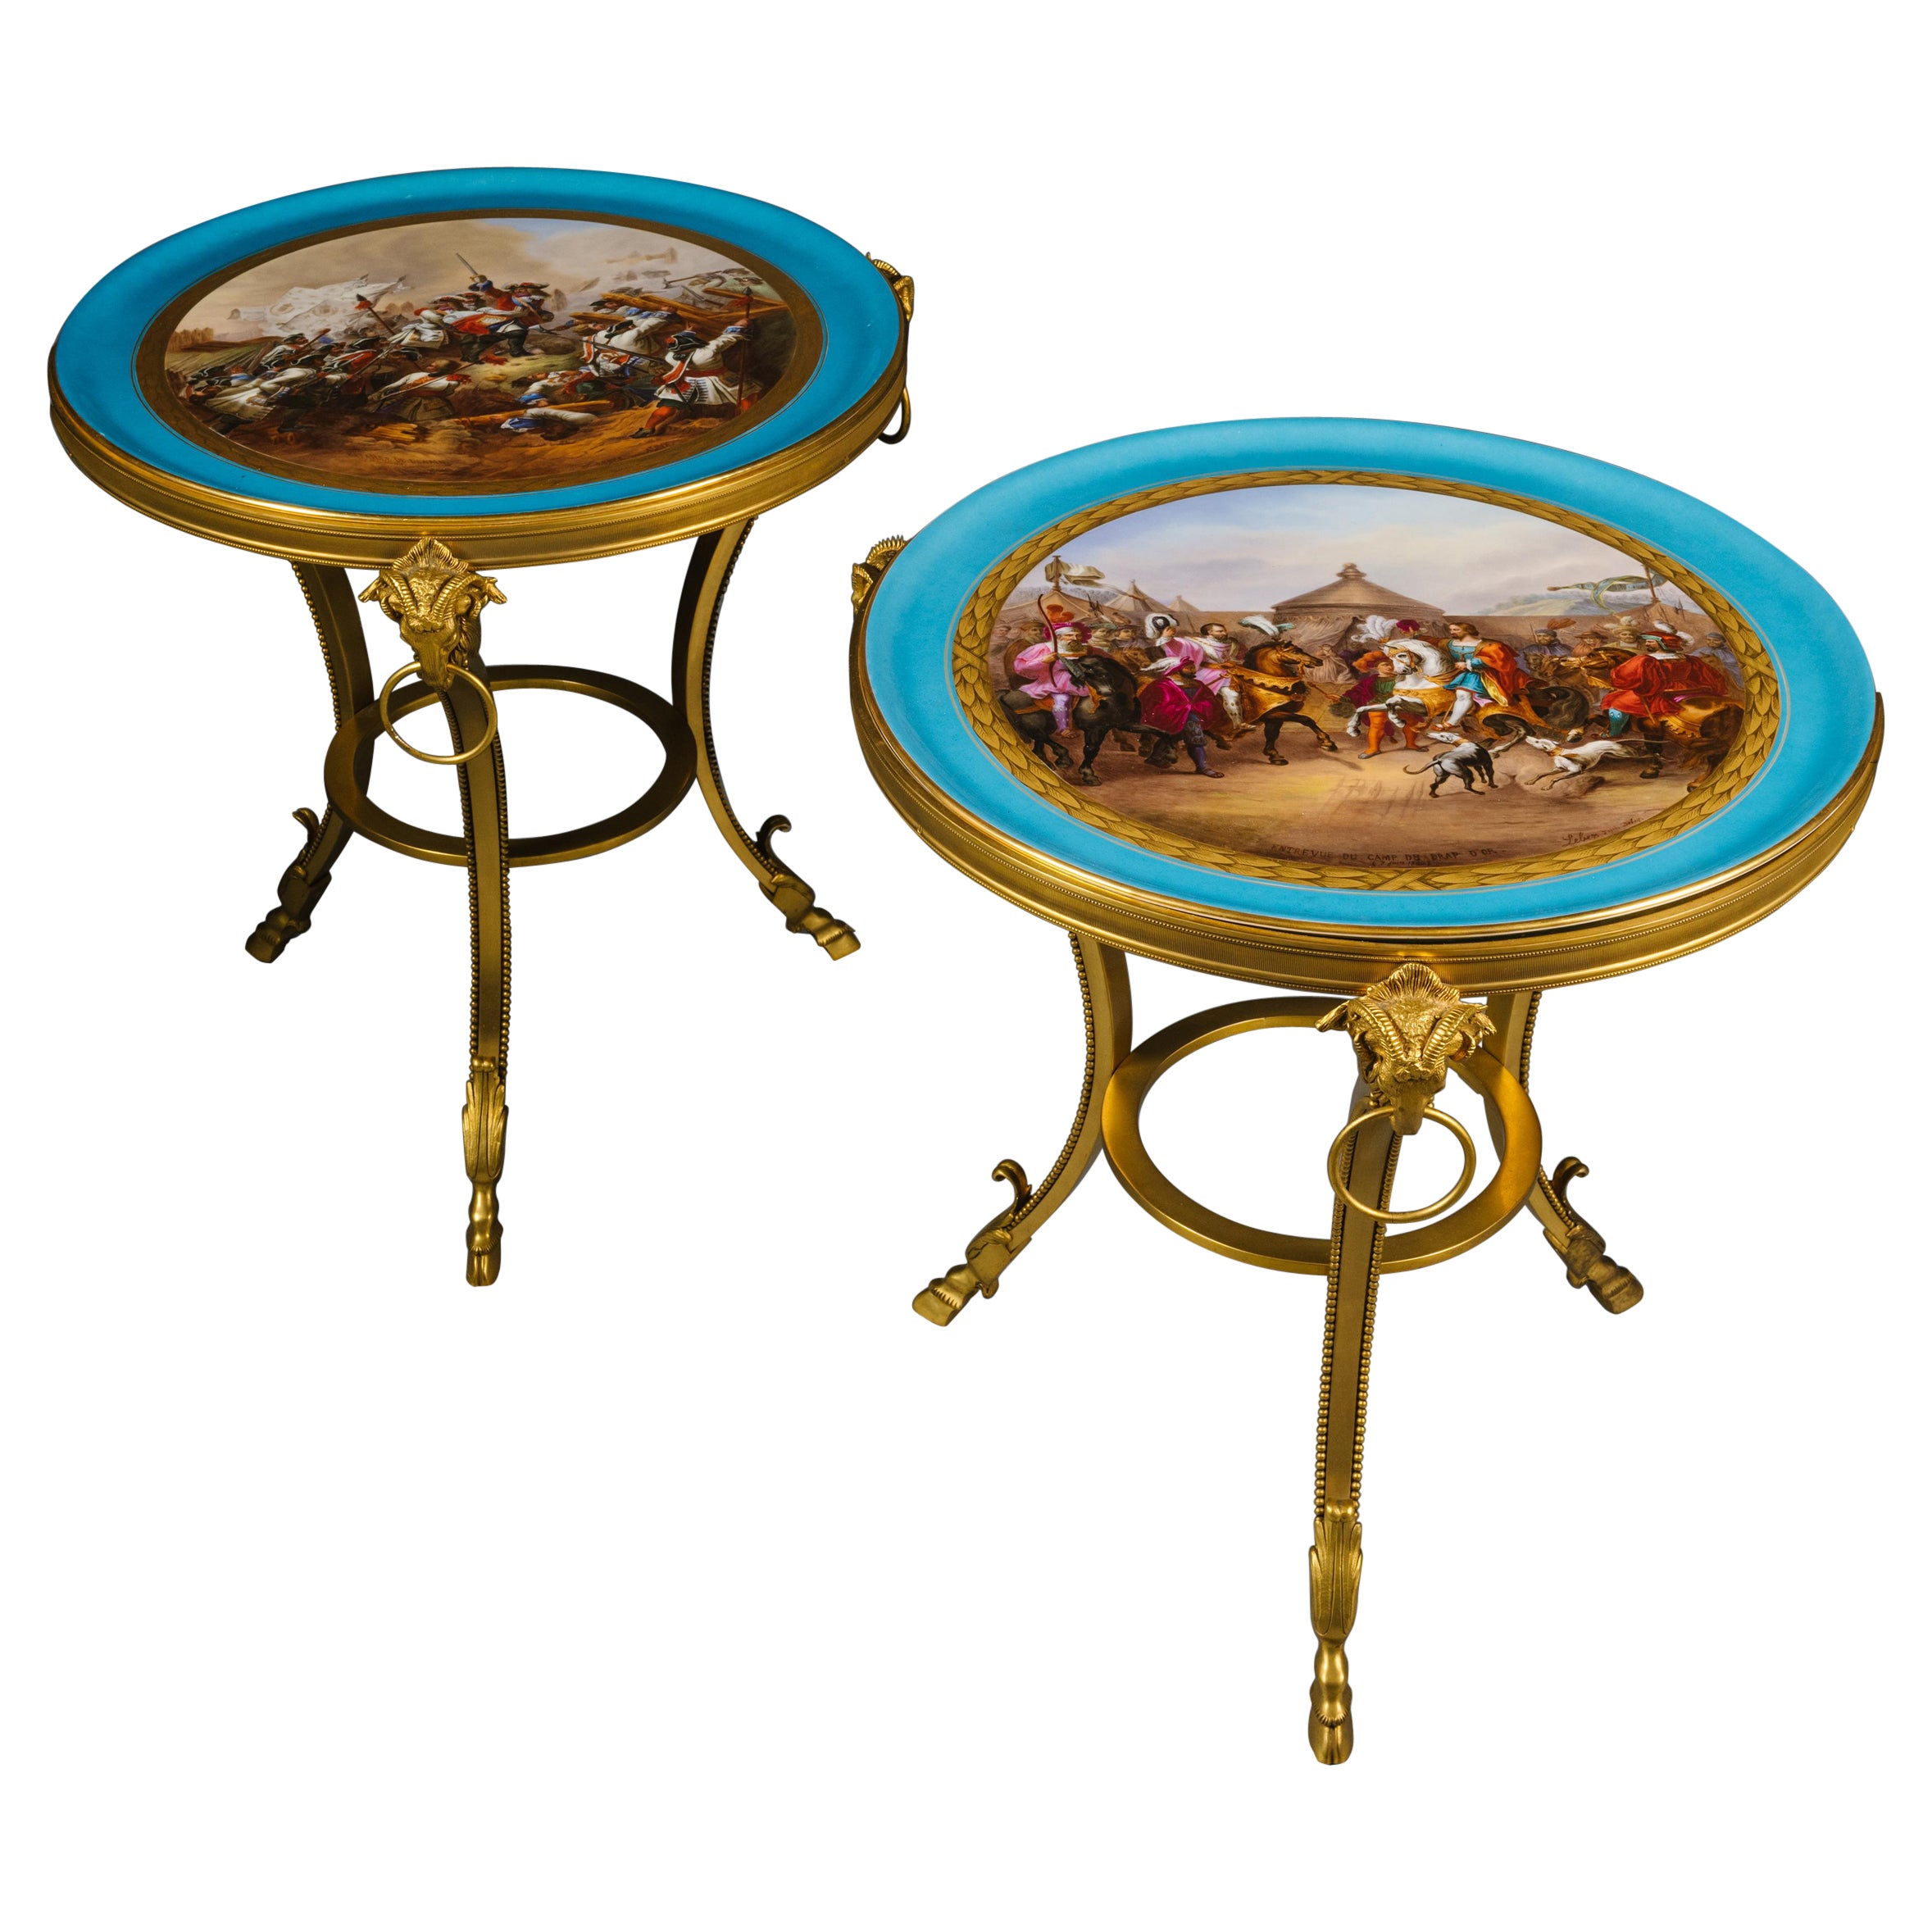 A Pair of Louis XVI Style Gilt-Bronze and Porcelain Low Side Tables For Sale